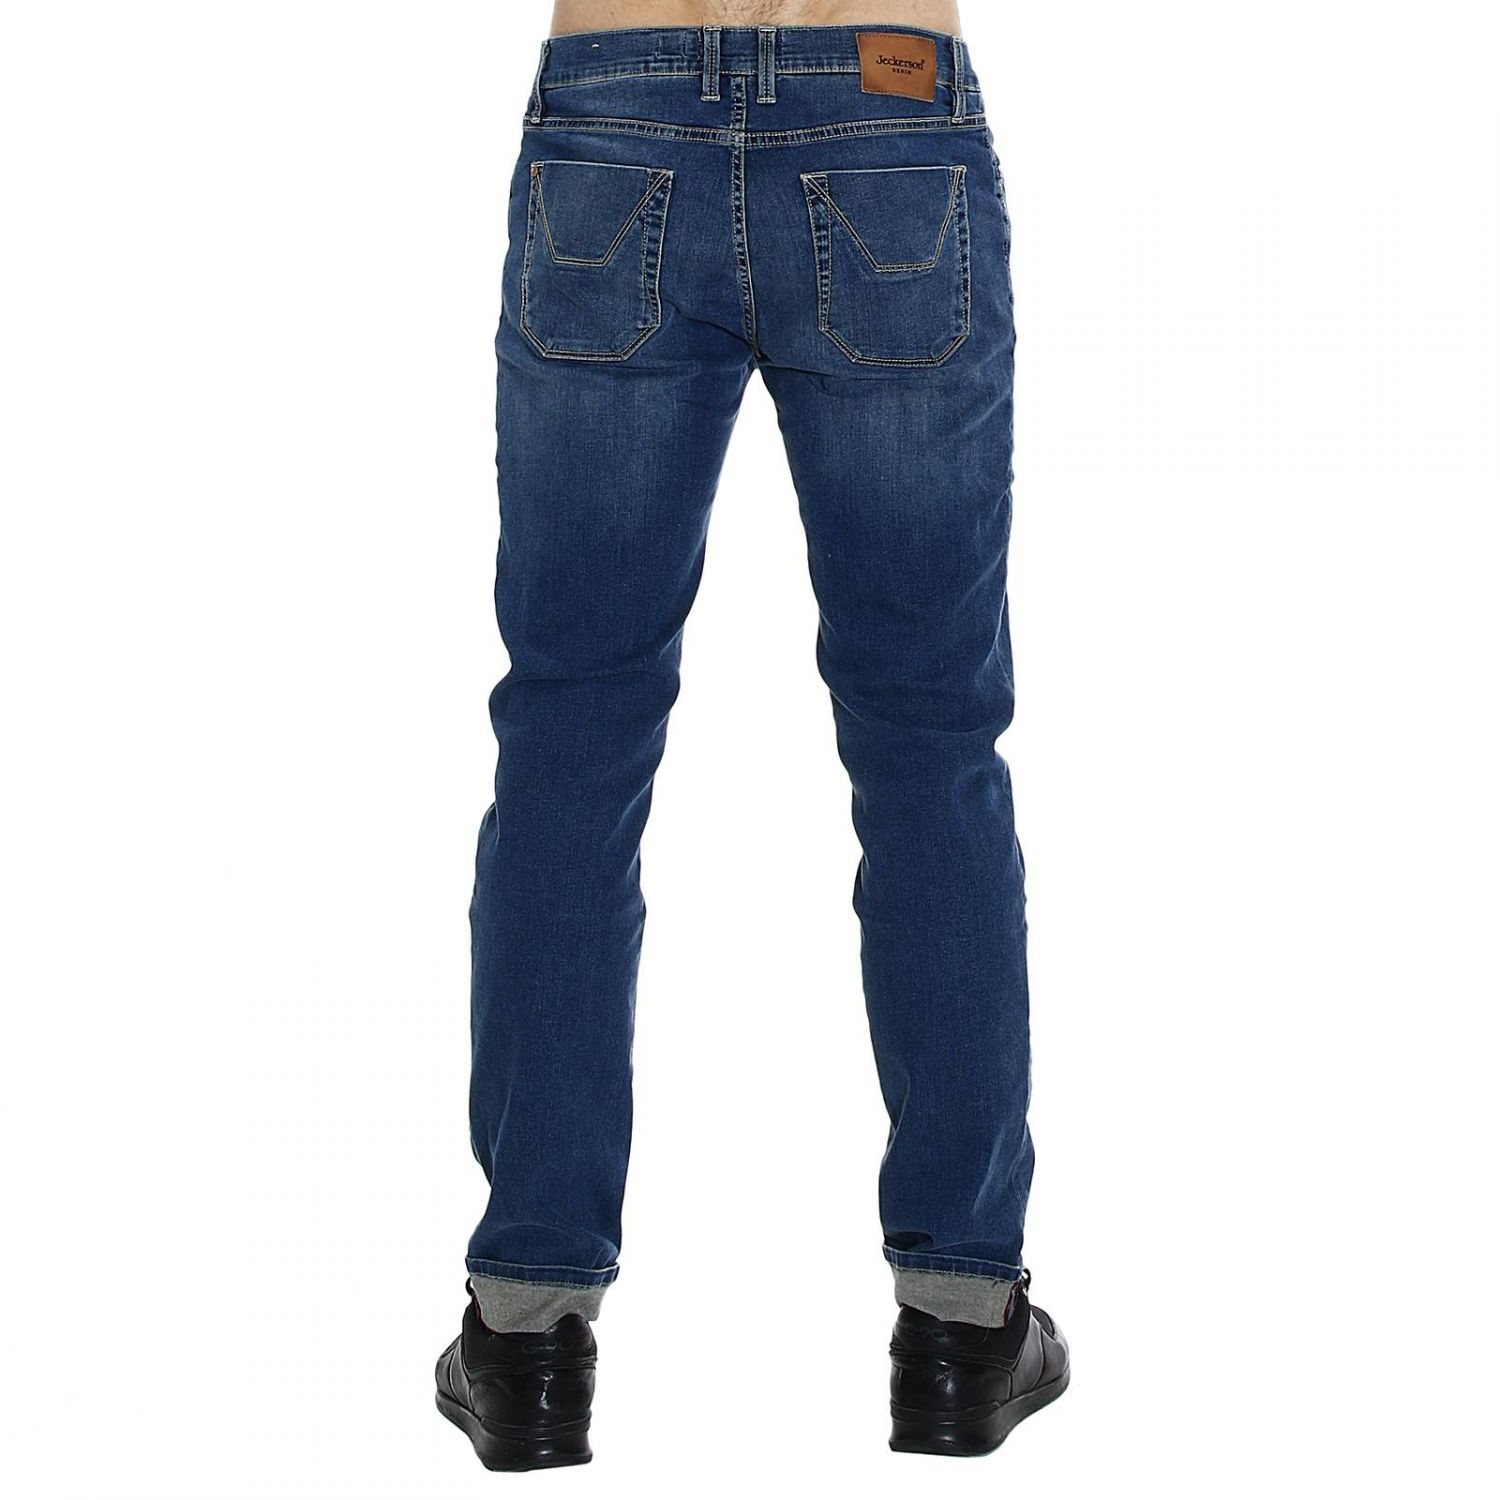 Lyst - Jeckerson Jeans Johnny Denim Used Slim With Patch in Blue for Men